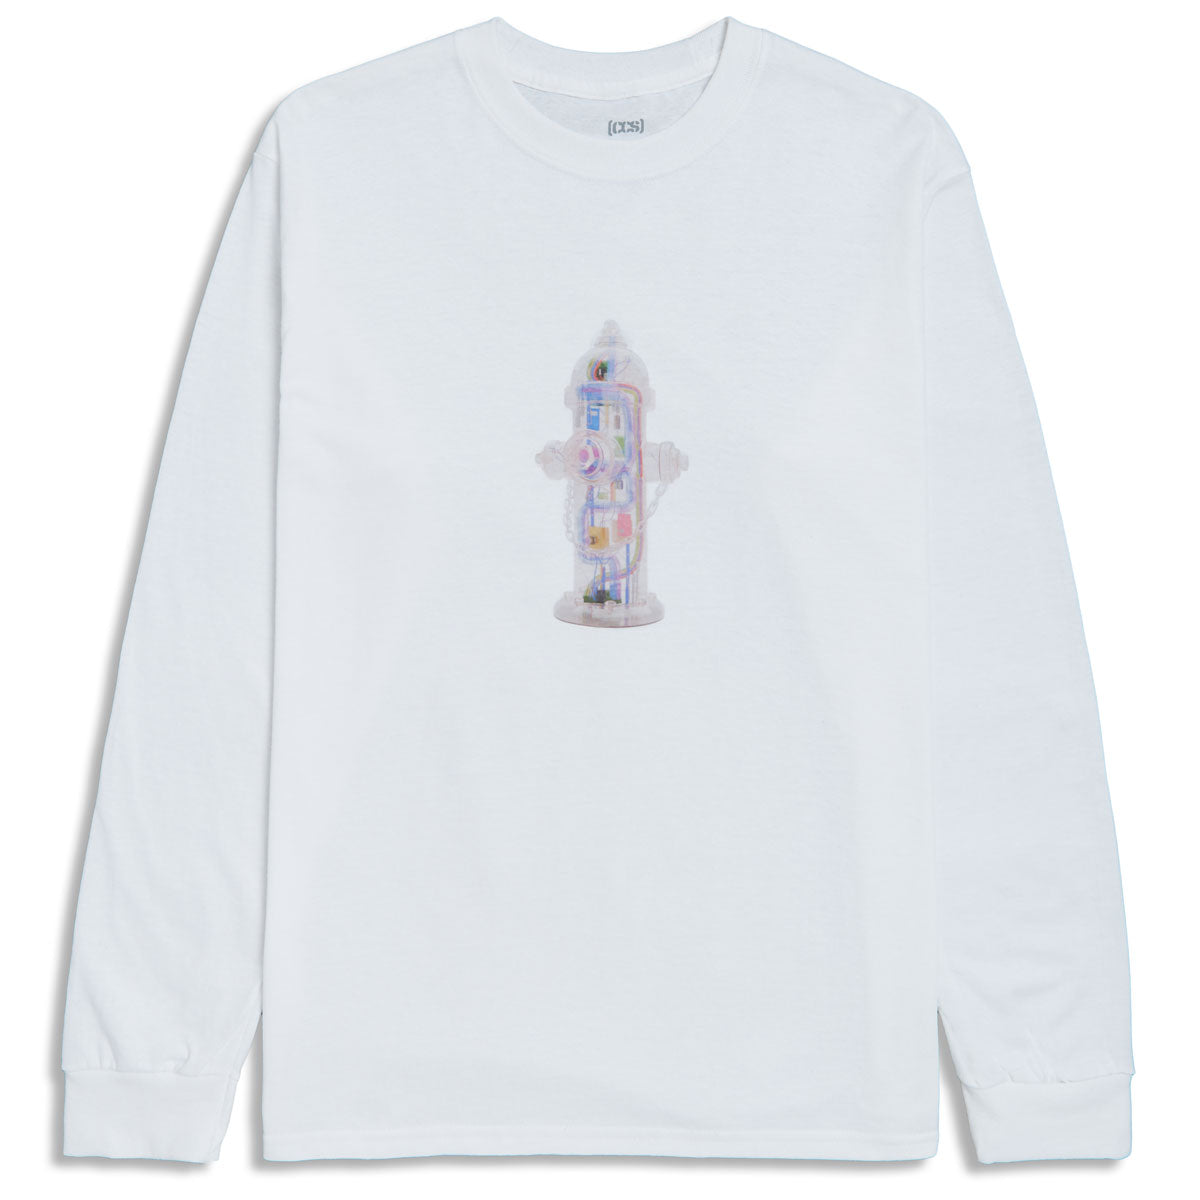 CCS Going Clear Hydrant Long Sleeve T-Shirt - White - LG image 1